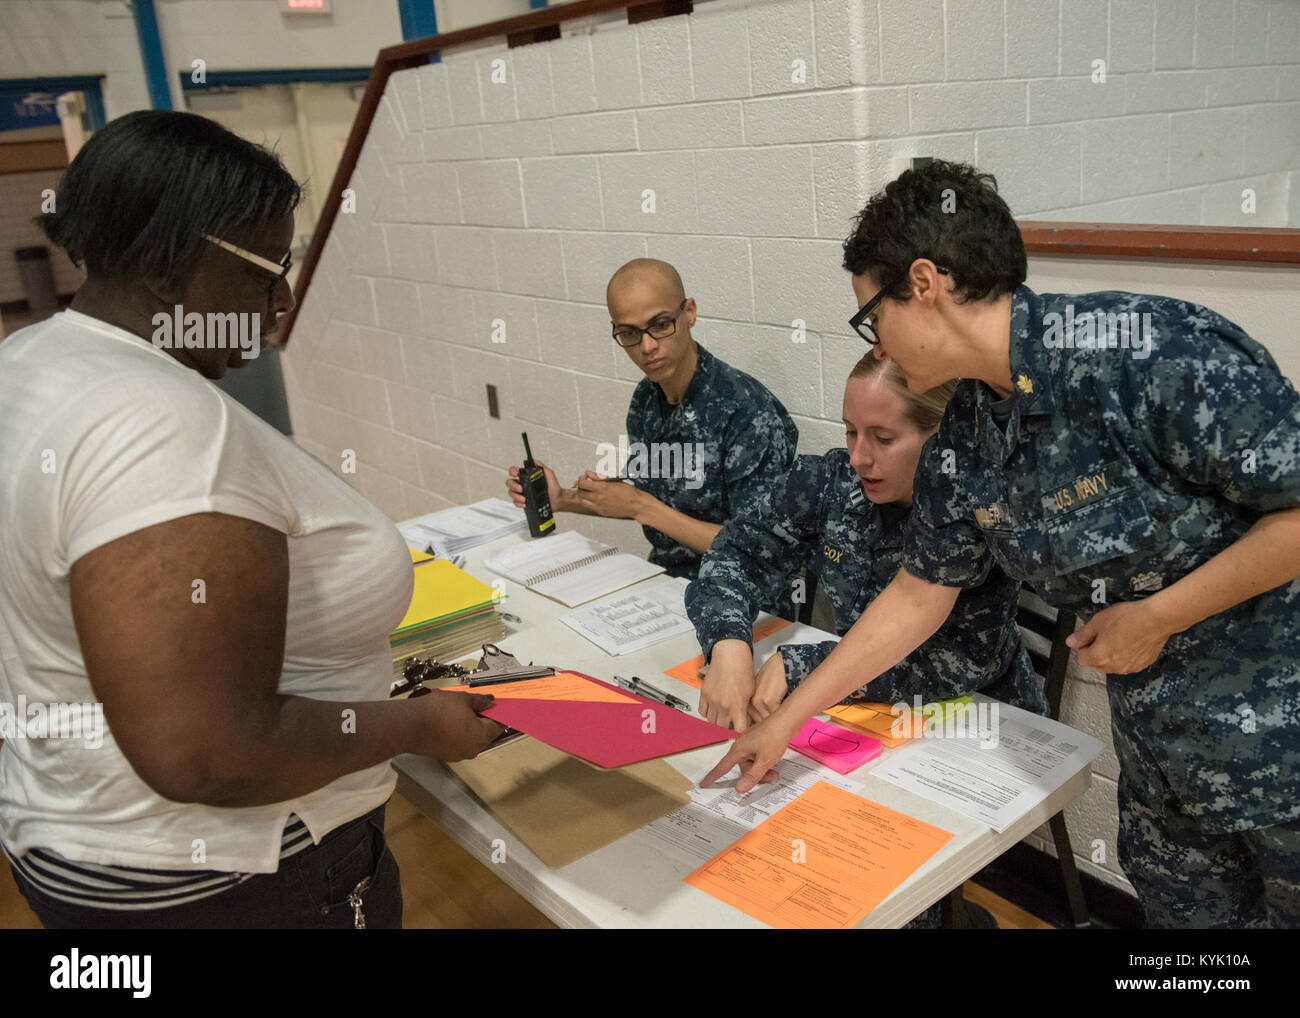 U.S. Navy Sailors assist a patient register for medical care at Paducah Tilghman High School in Paducah, Ky., July 18, 2016, during the Bluegrass Medical Innovative Readiness Training. During this training several Air National Guard units including the Kentucky Air National Guard, U.S. Navy Reserves, U.S. Army National Guard and Delta Regional Authority will offer medical and dental care at no cost to residents in three Western Kentucky locations from July 18 to 27. (U.S. Air National Guard photo by Master Sgt. Phil Speck) Stock Photo